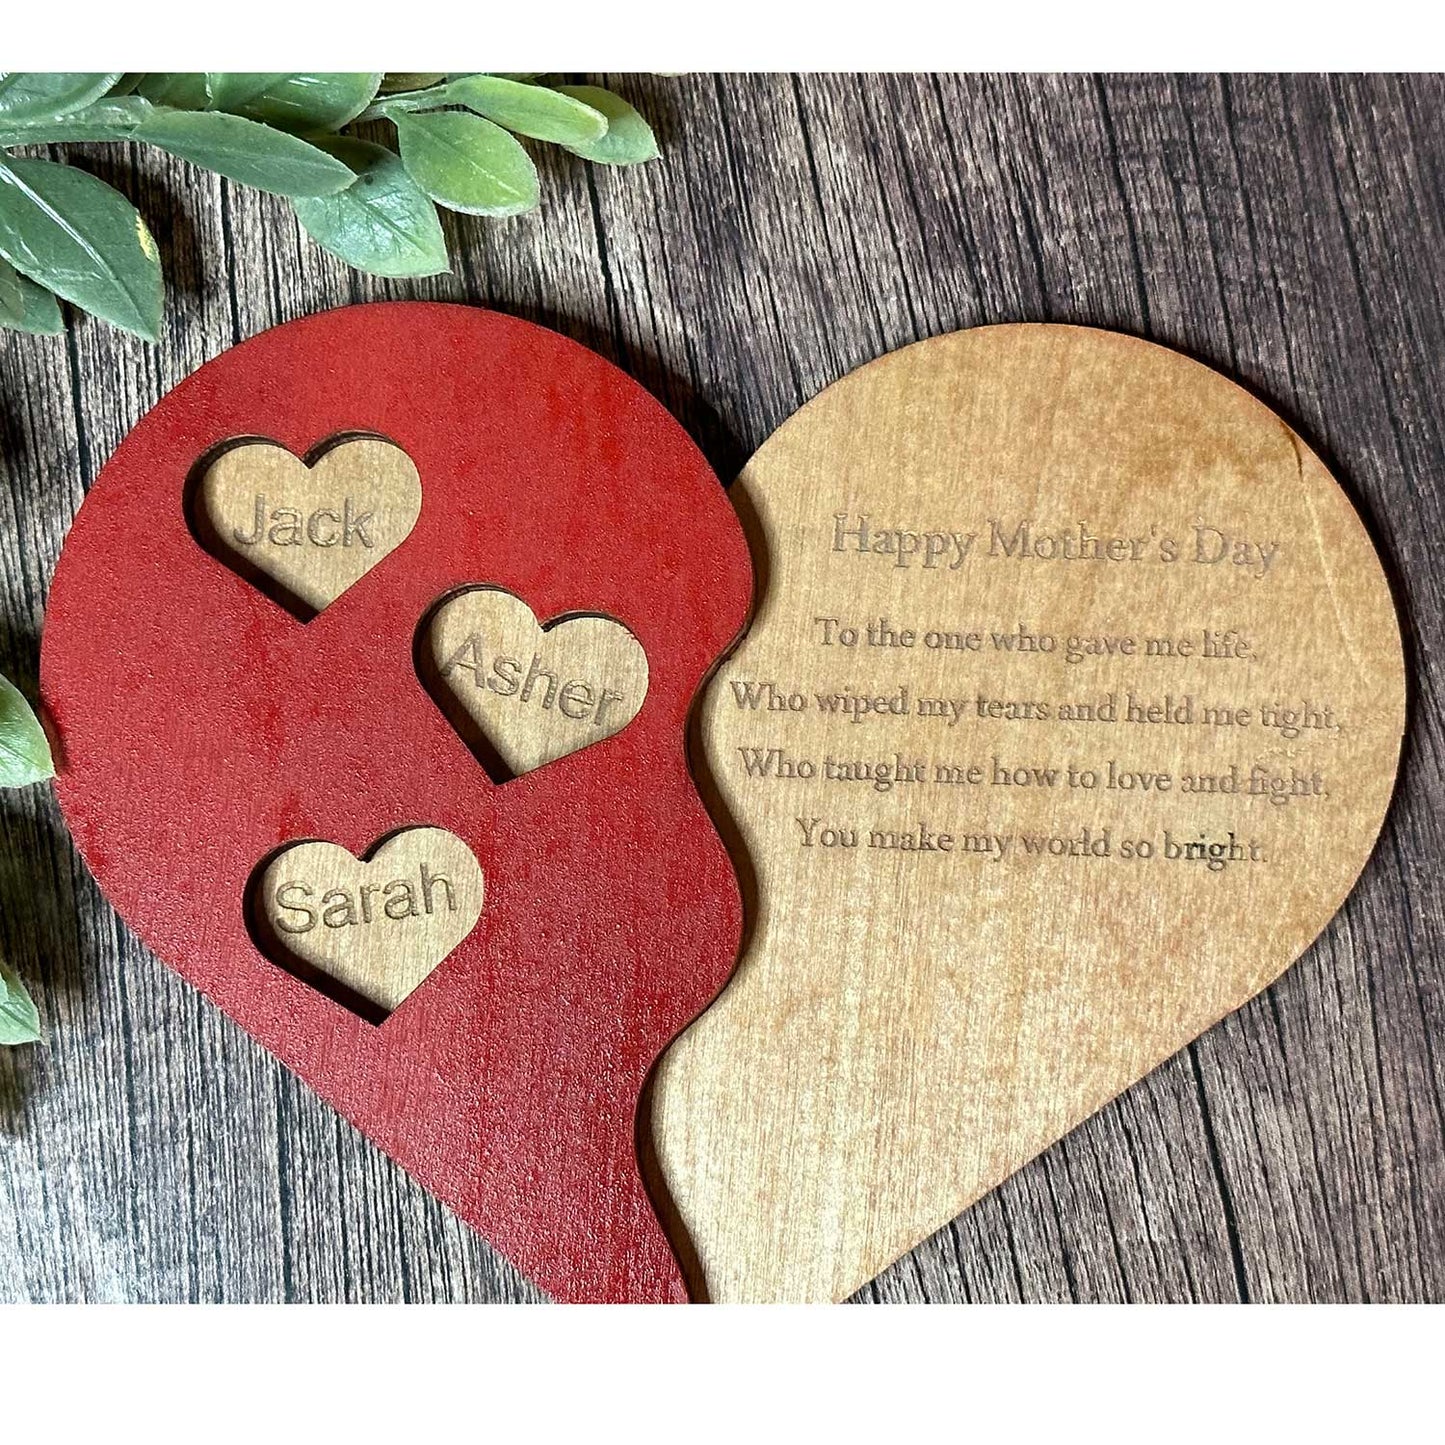 Happy Mothers Day 3D Heart with Poem - Personalized Wall Art for a Mother's Day Gift